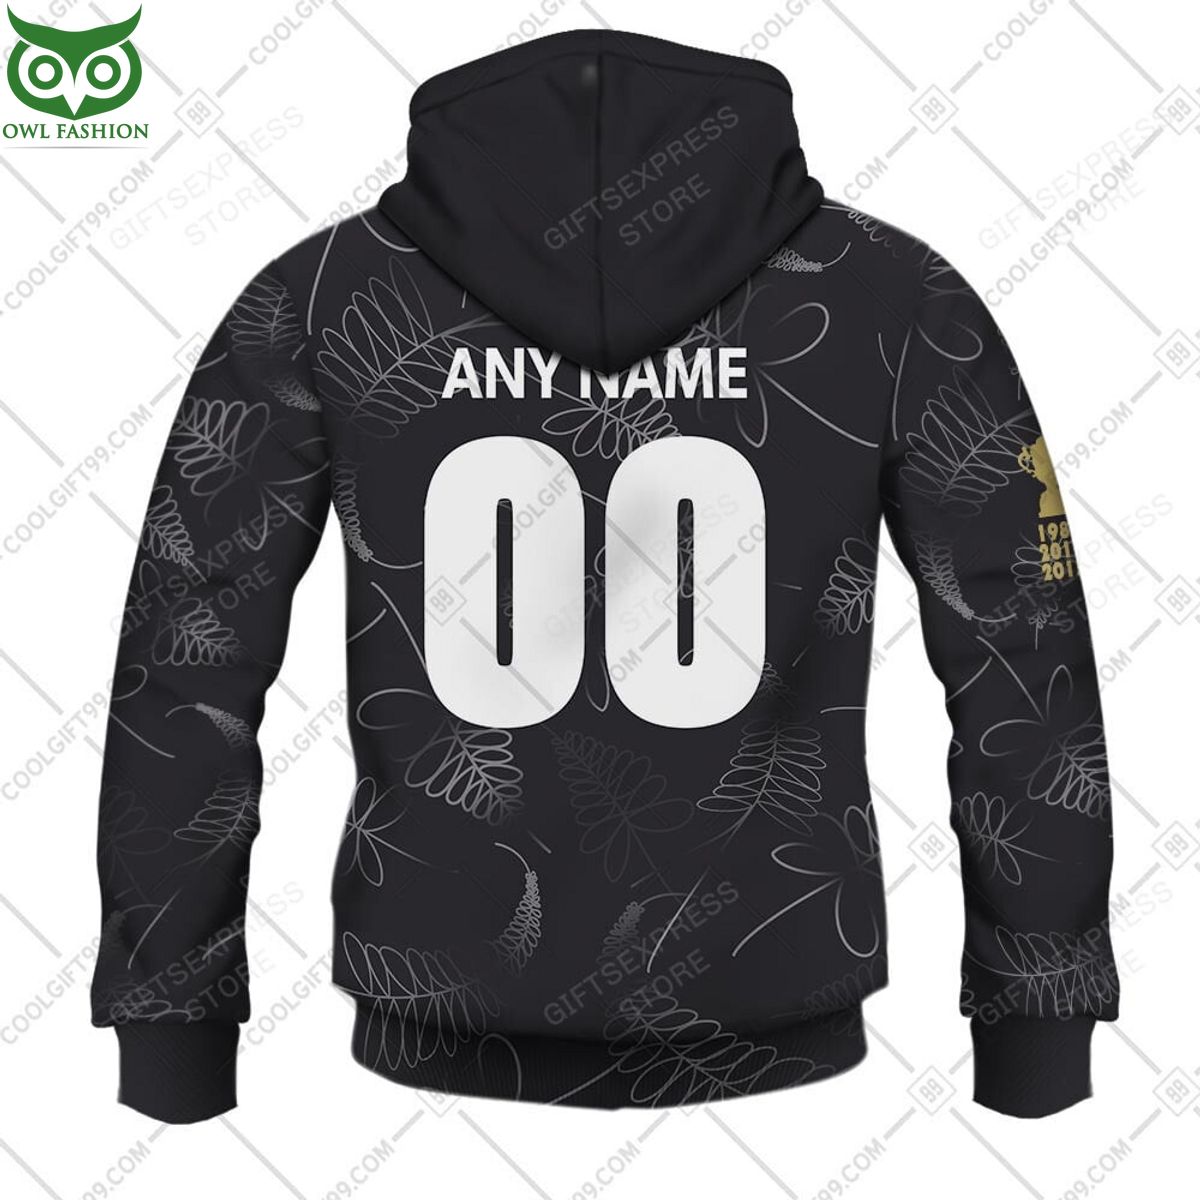 rugby world cup new zealand all black personalized 3d hoodie tshirt 2 waFWc.jpg